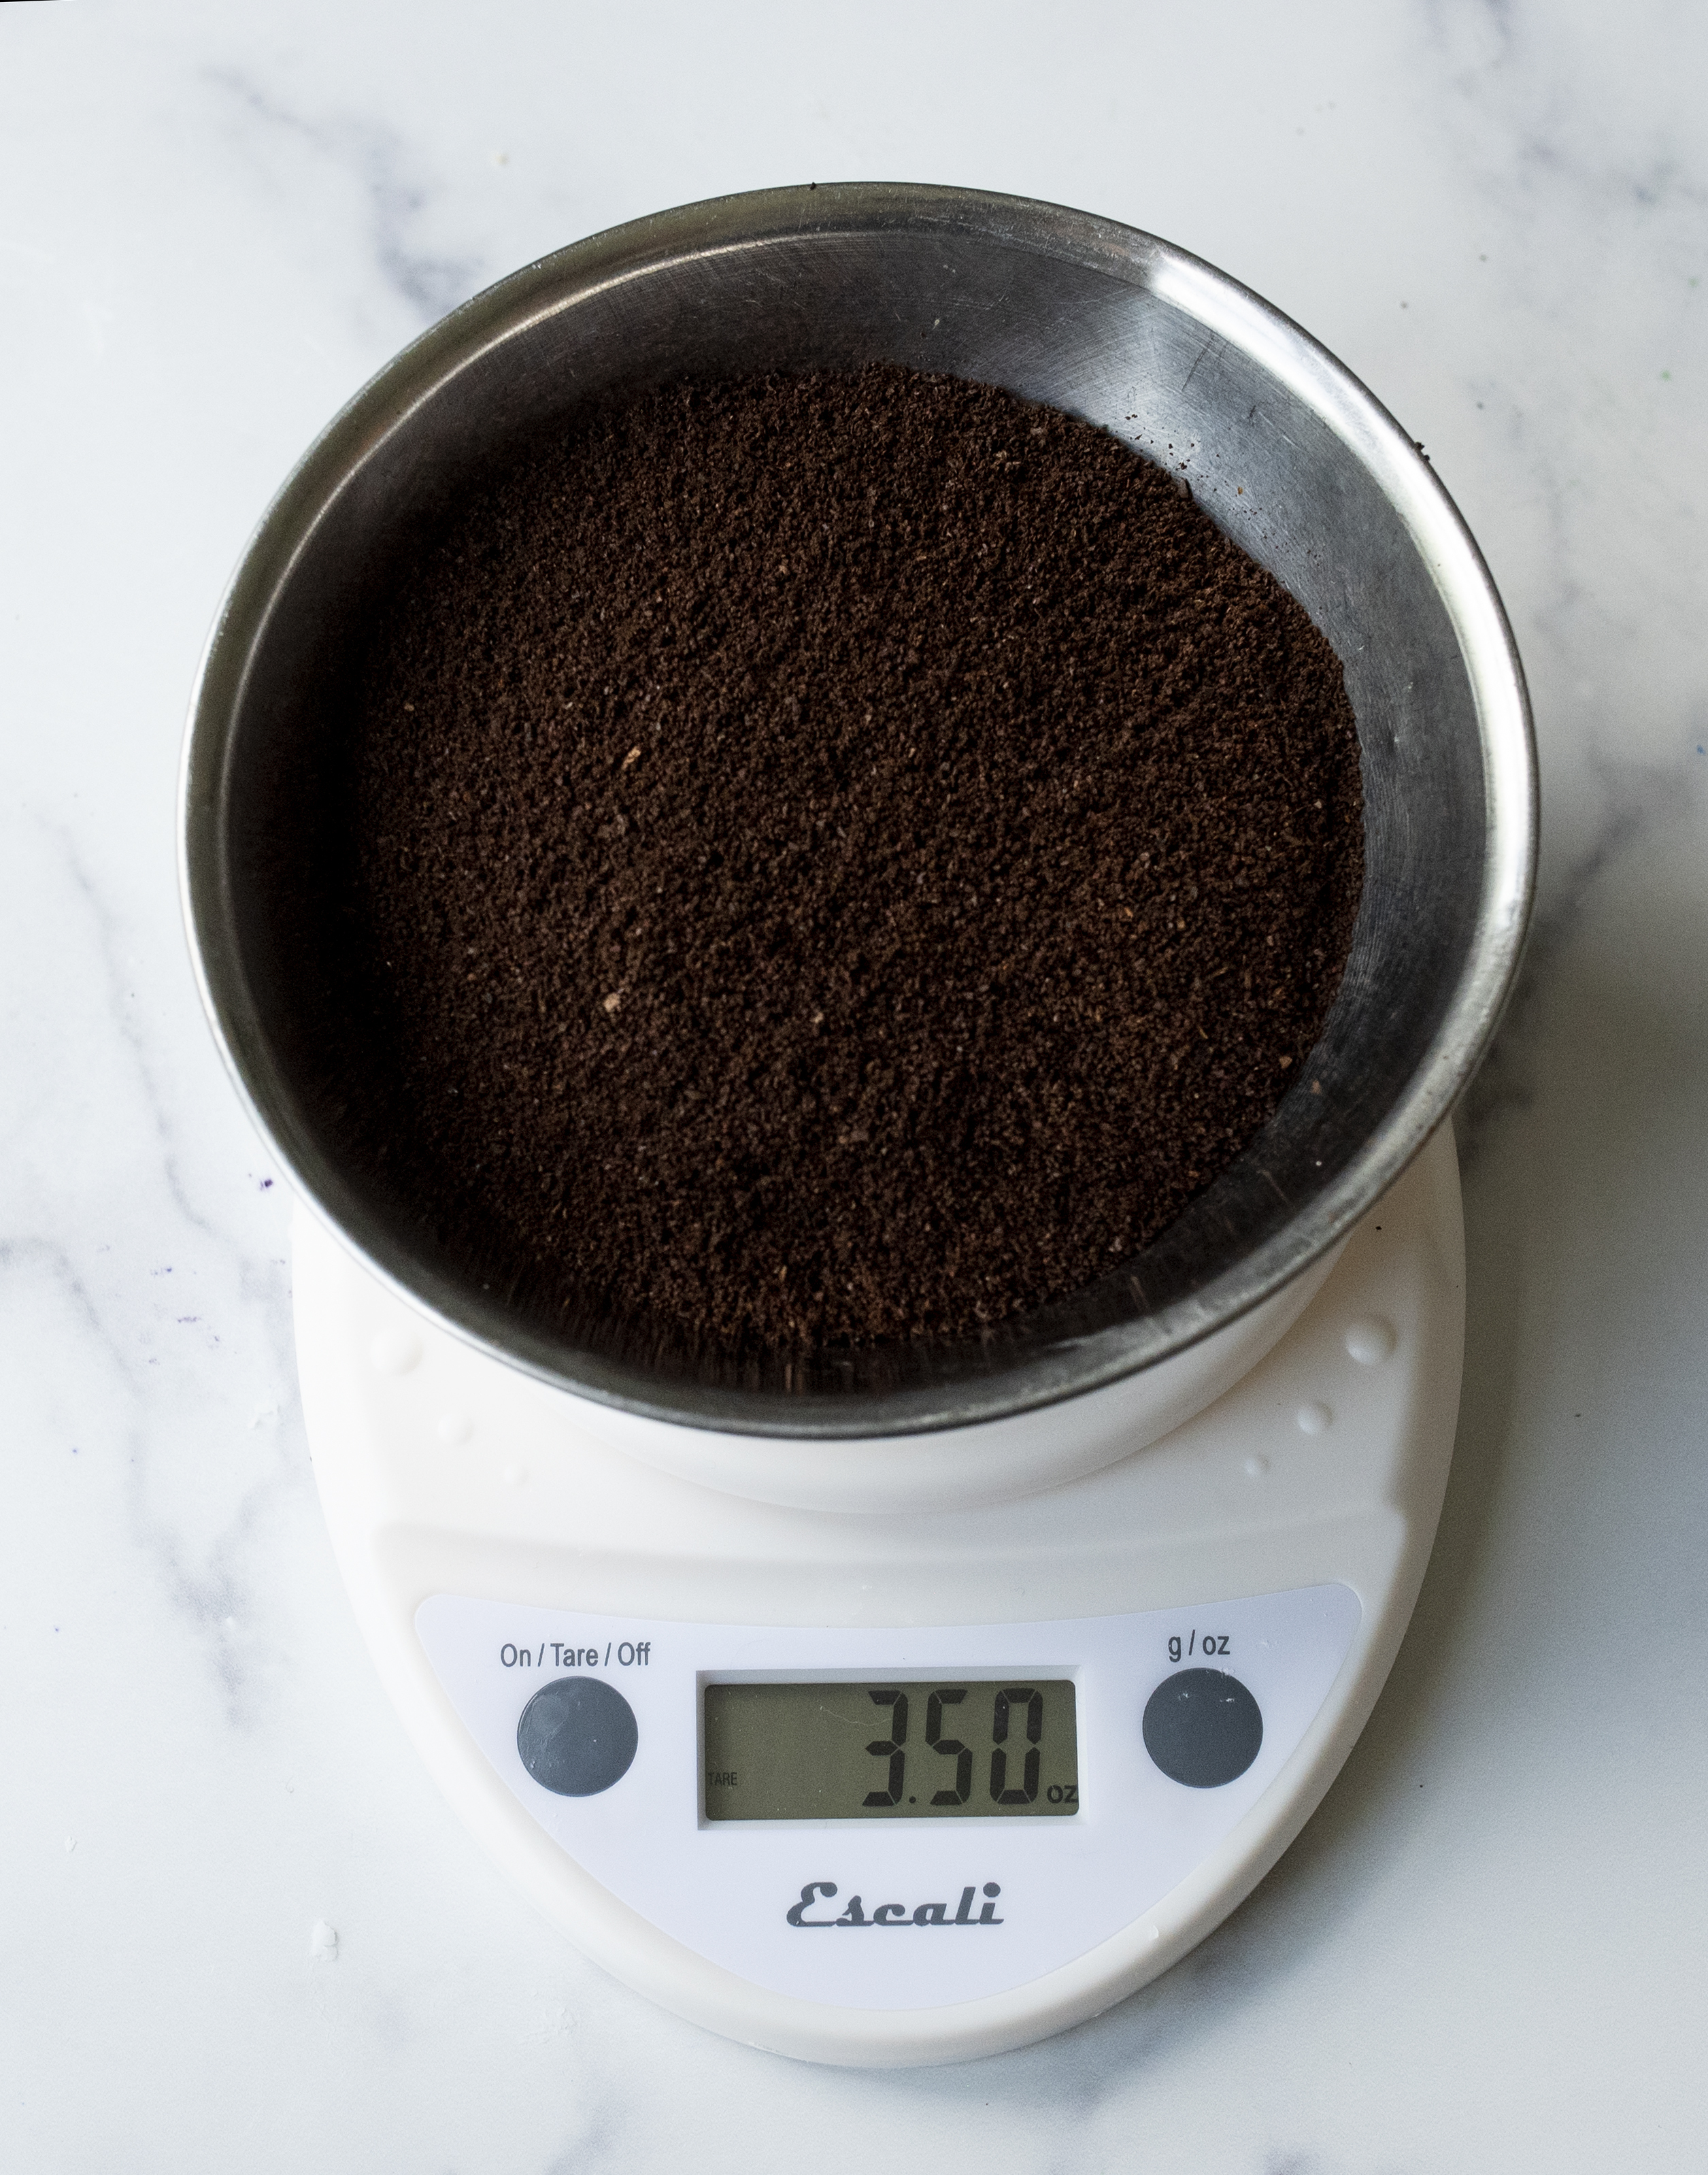 Weighing ground coffee on digital scale.